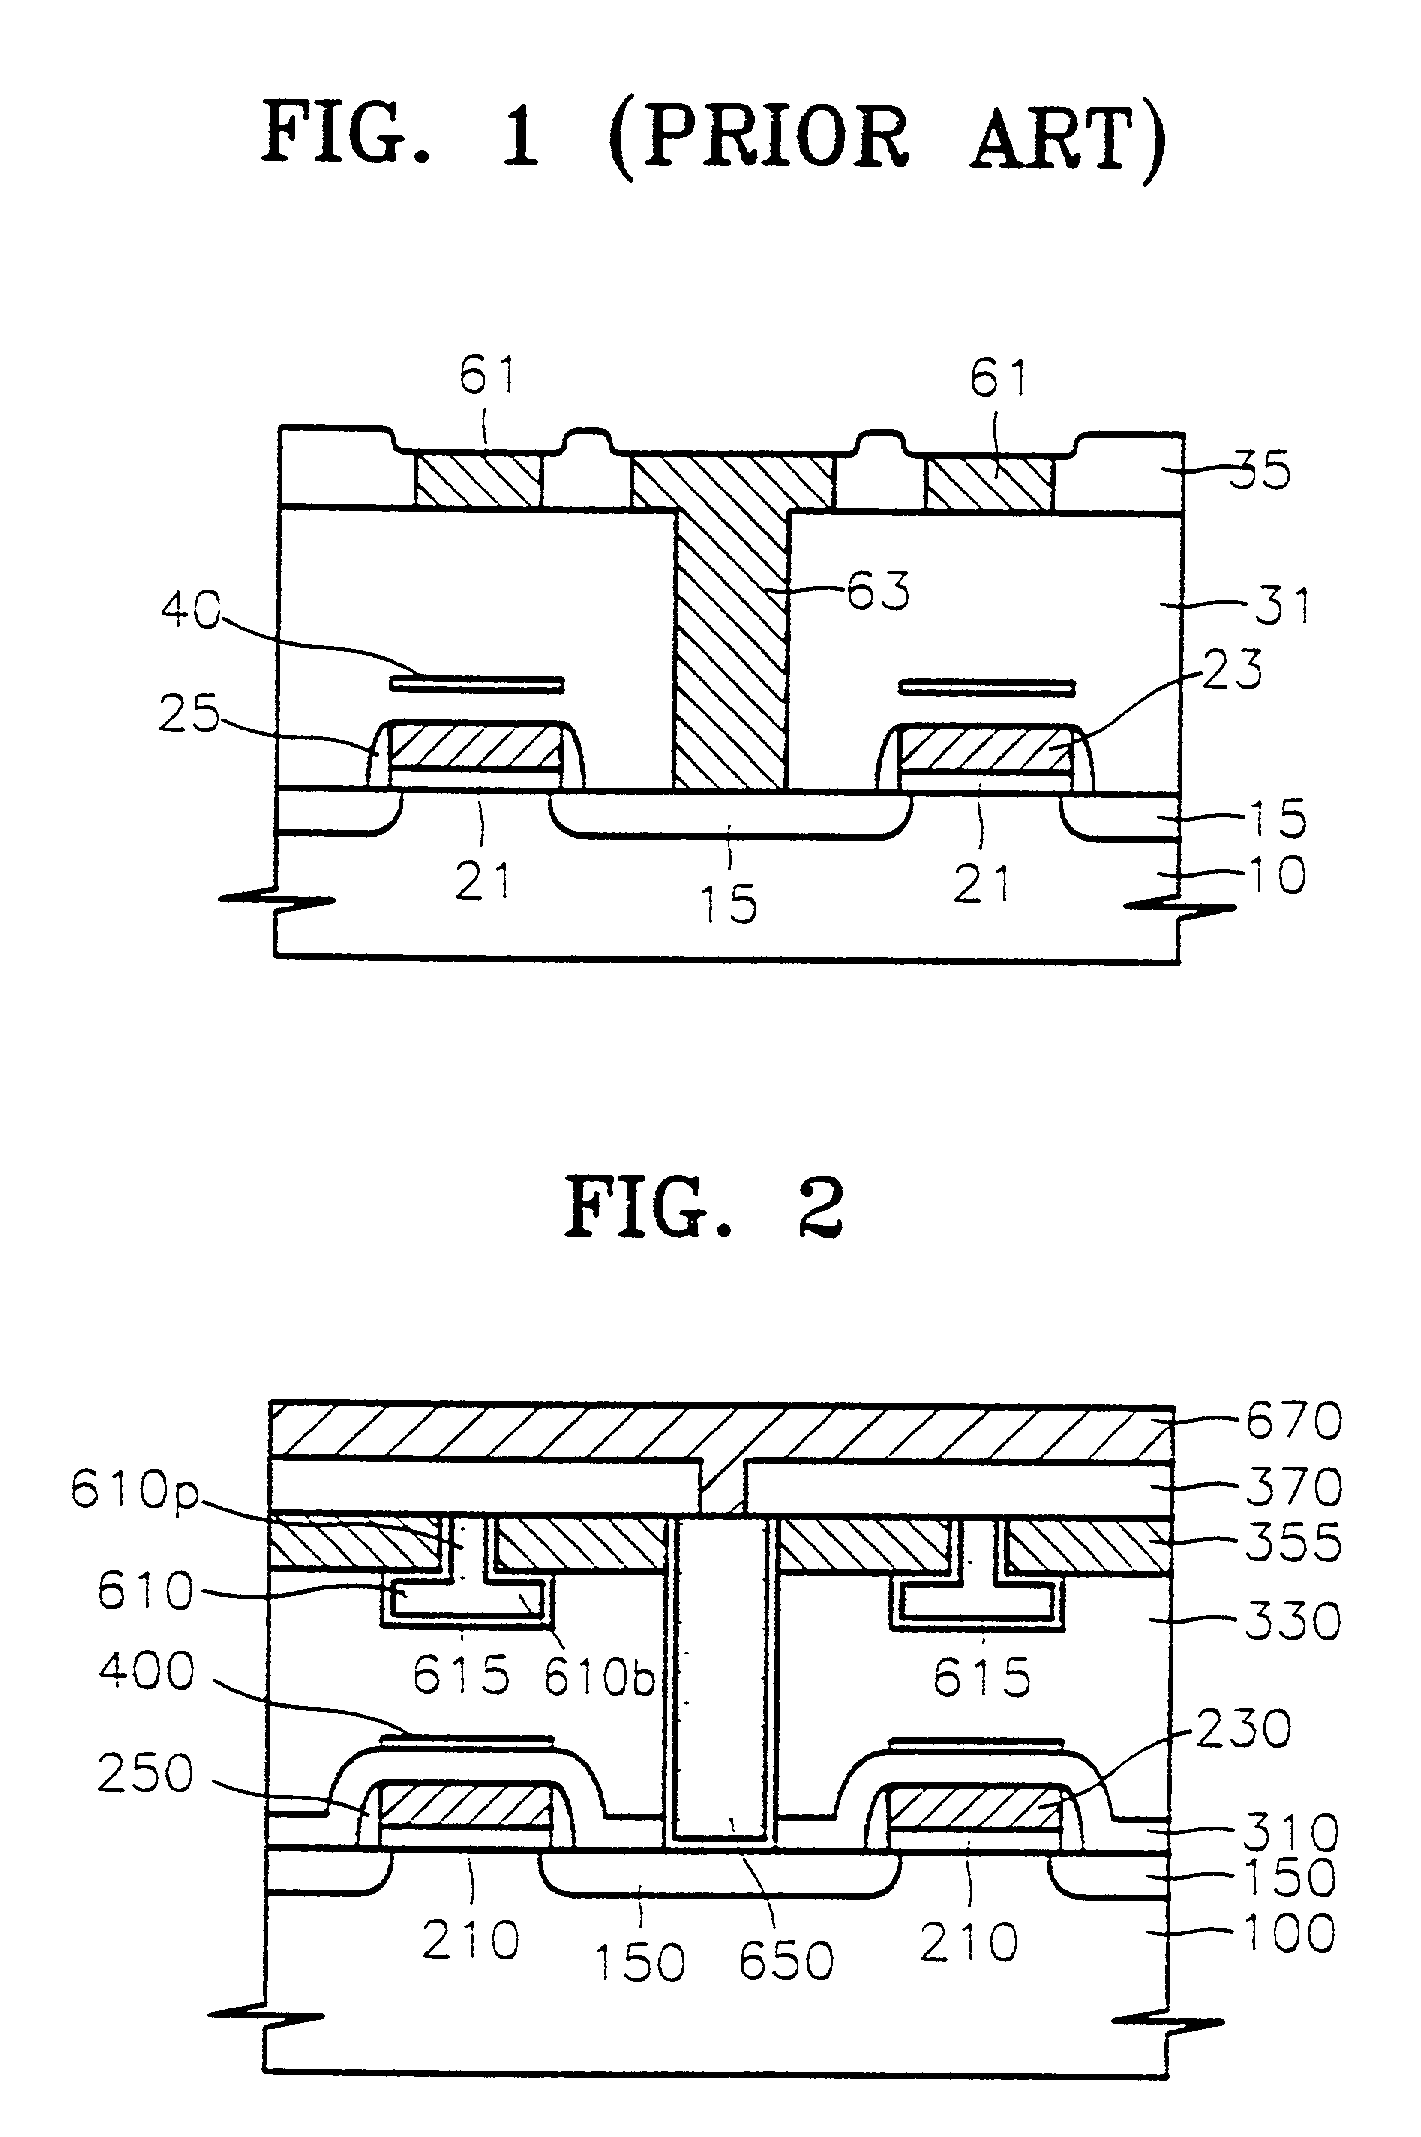 Wiring structure of semiconductor device